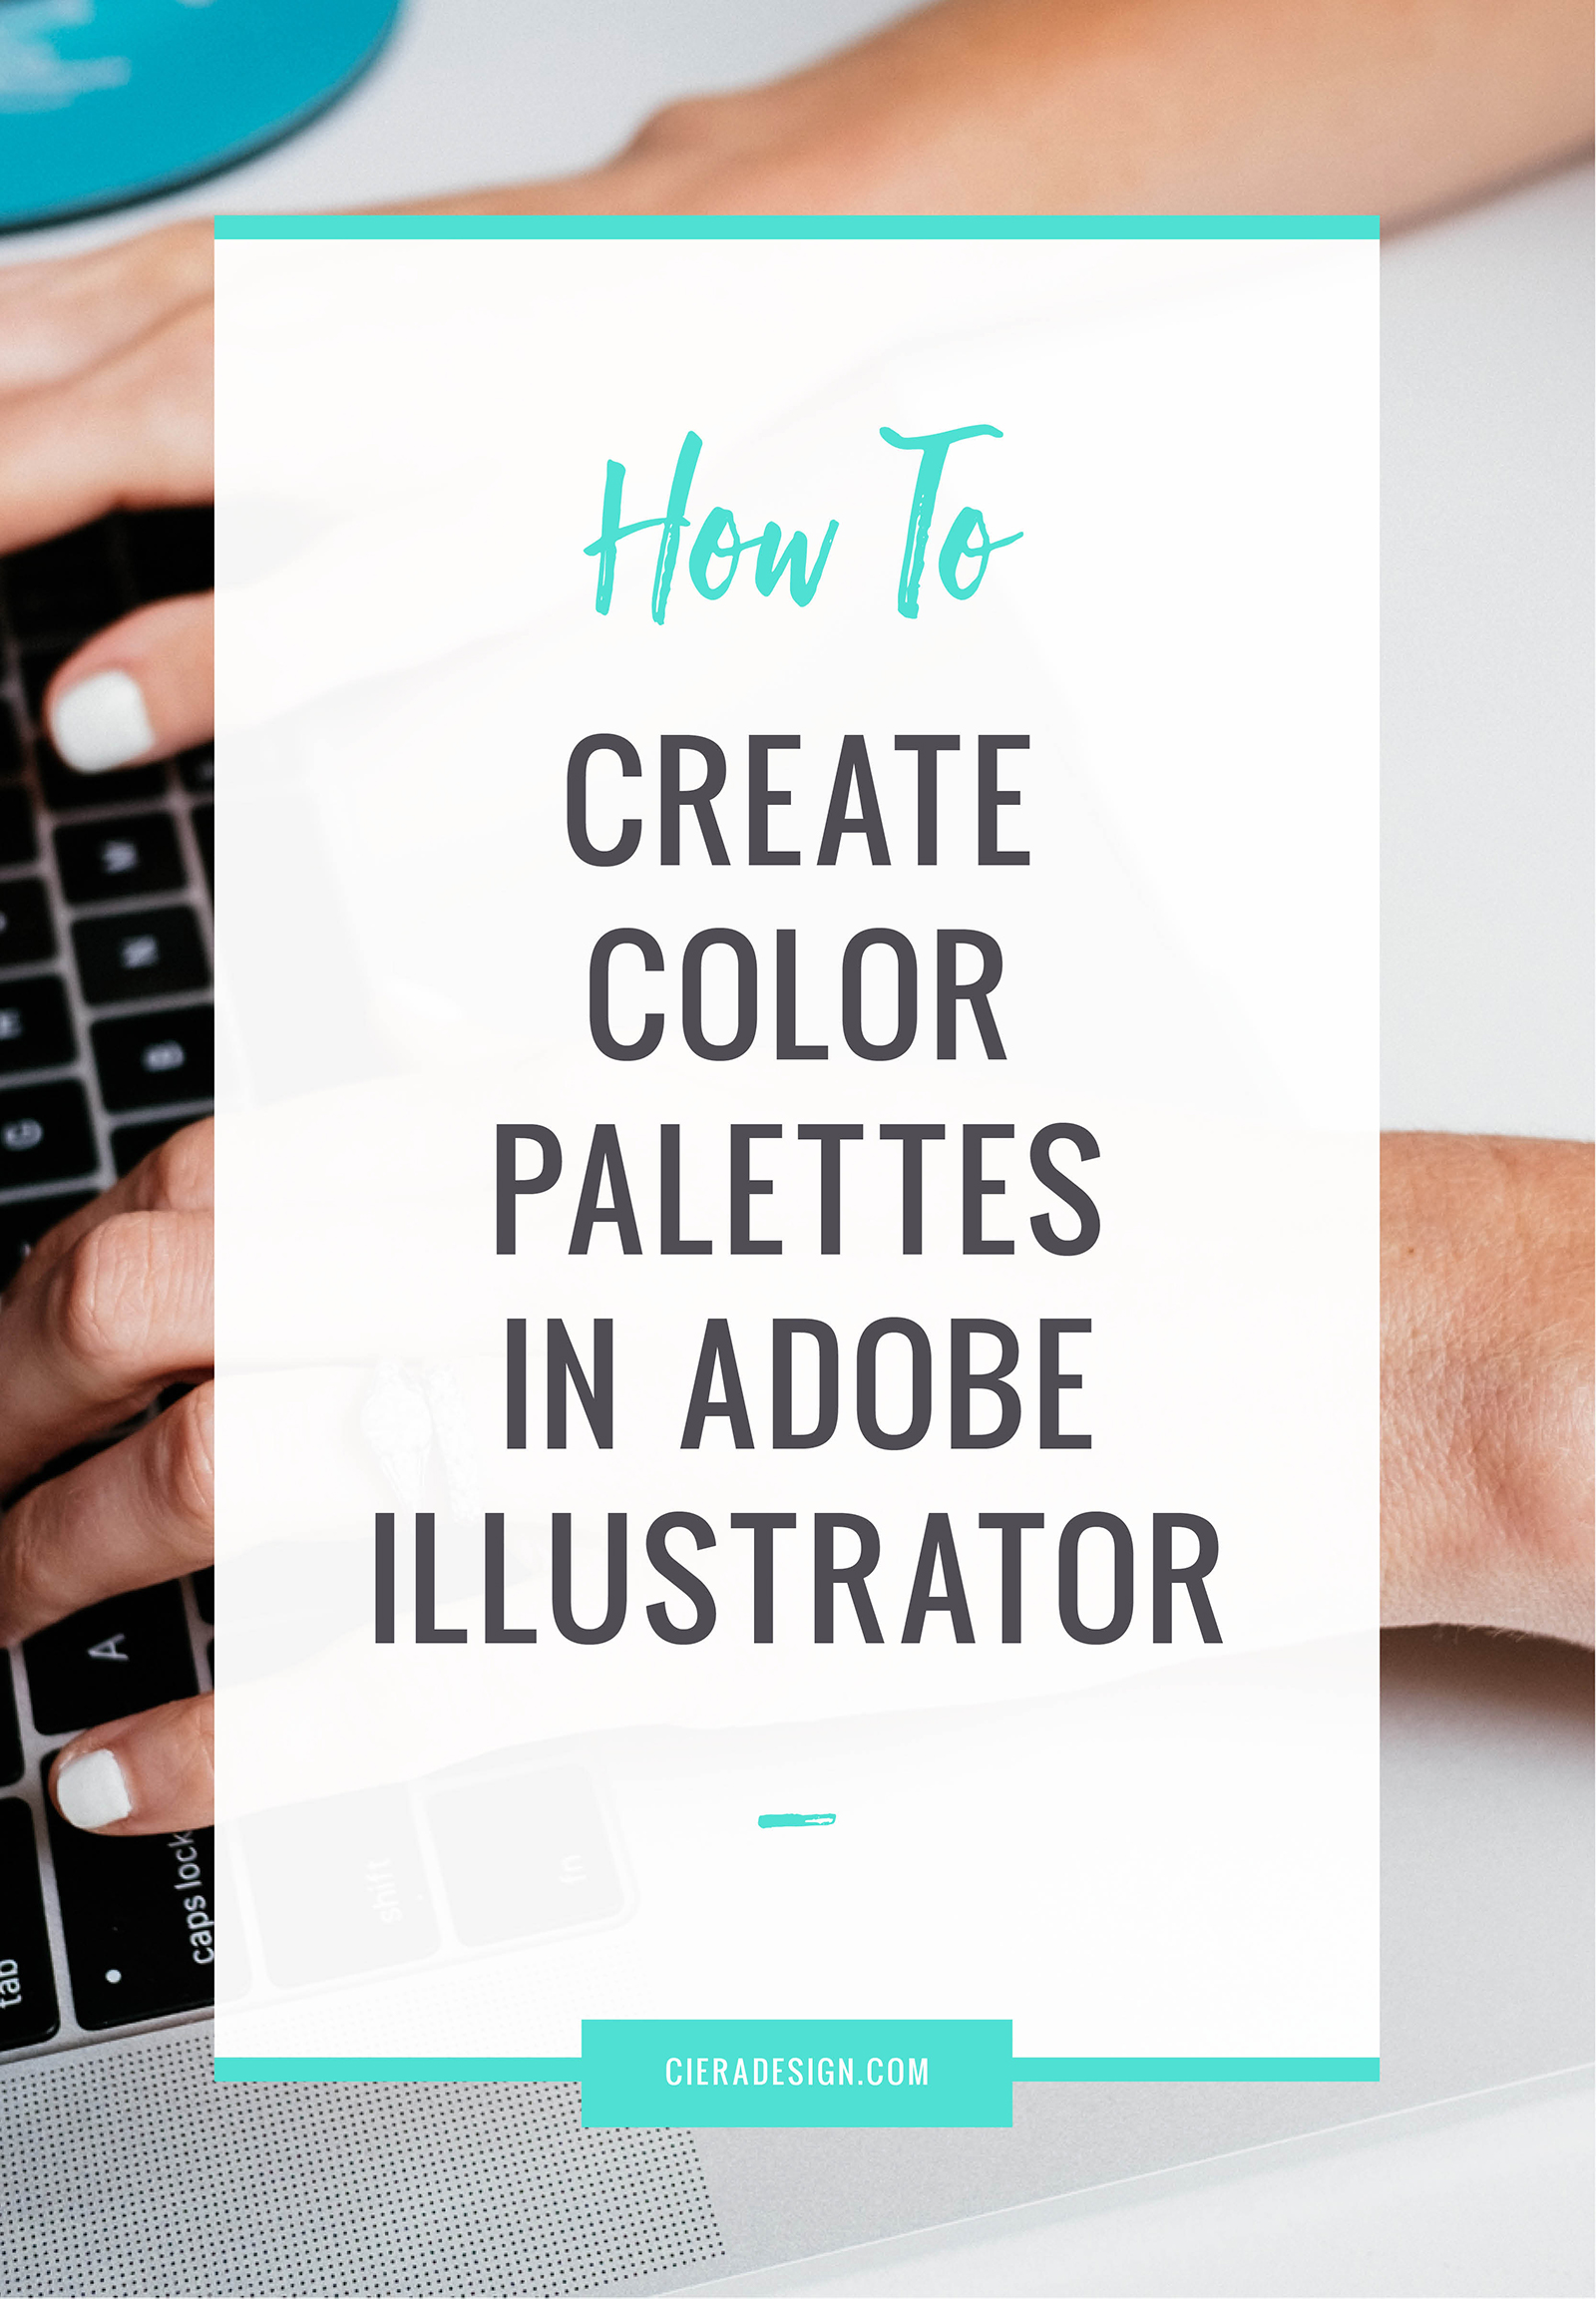 Here are three essential tips for working with color palettes in Adobe Illustrator.